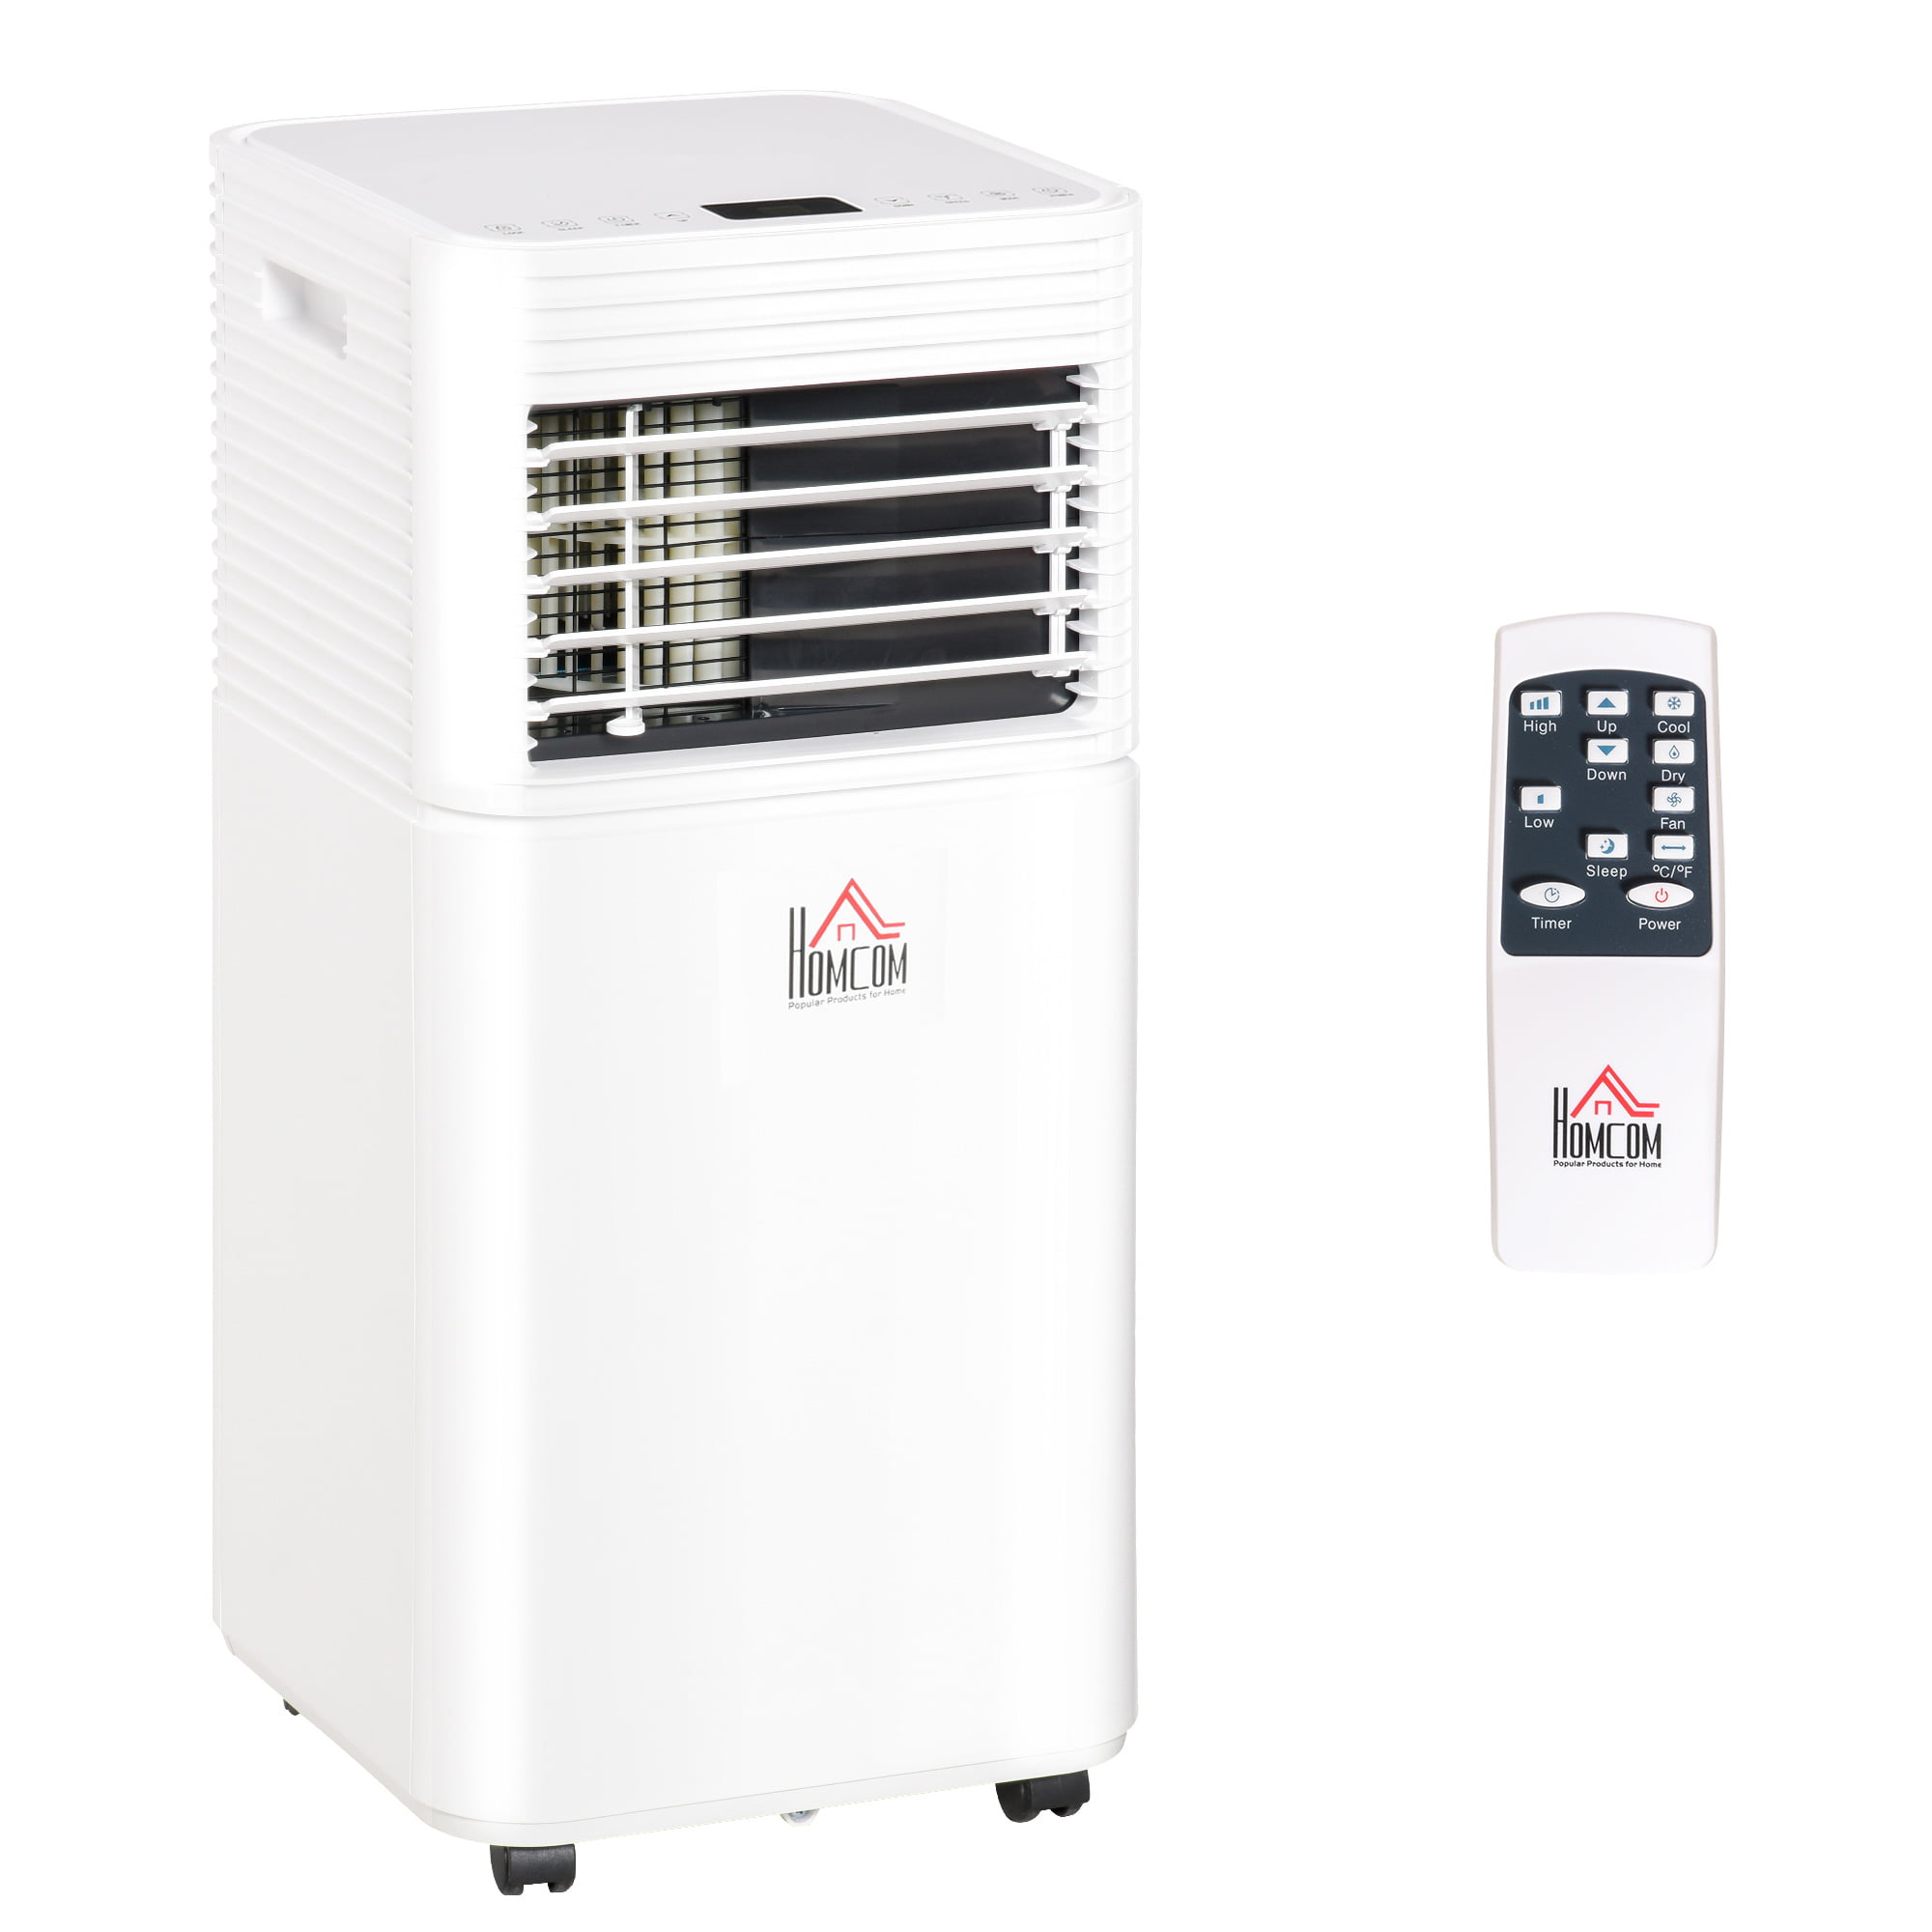 HOMCOM 7000BTU 4-In-1 Compact Portable Mobile Air Conditioner Unit Cooling Dehumidifying Ventilating w/Fan Remote LED Display 24 Hr Timer Auto Shut-Down Home Office Summer 